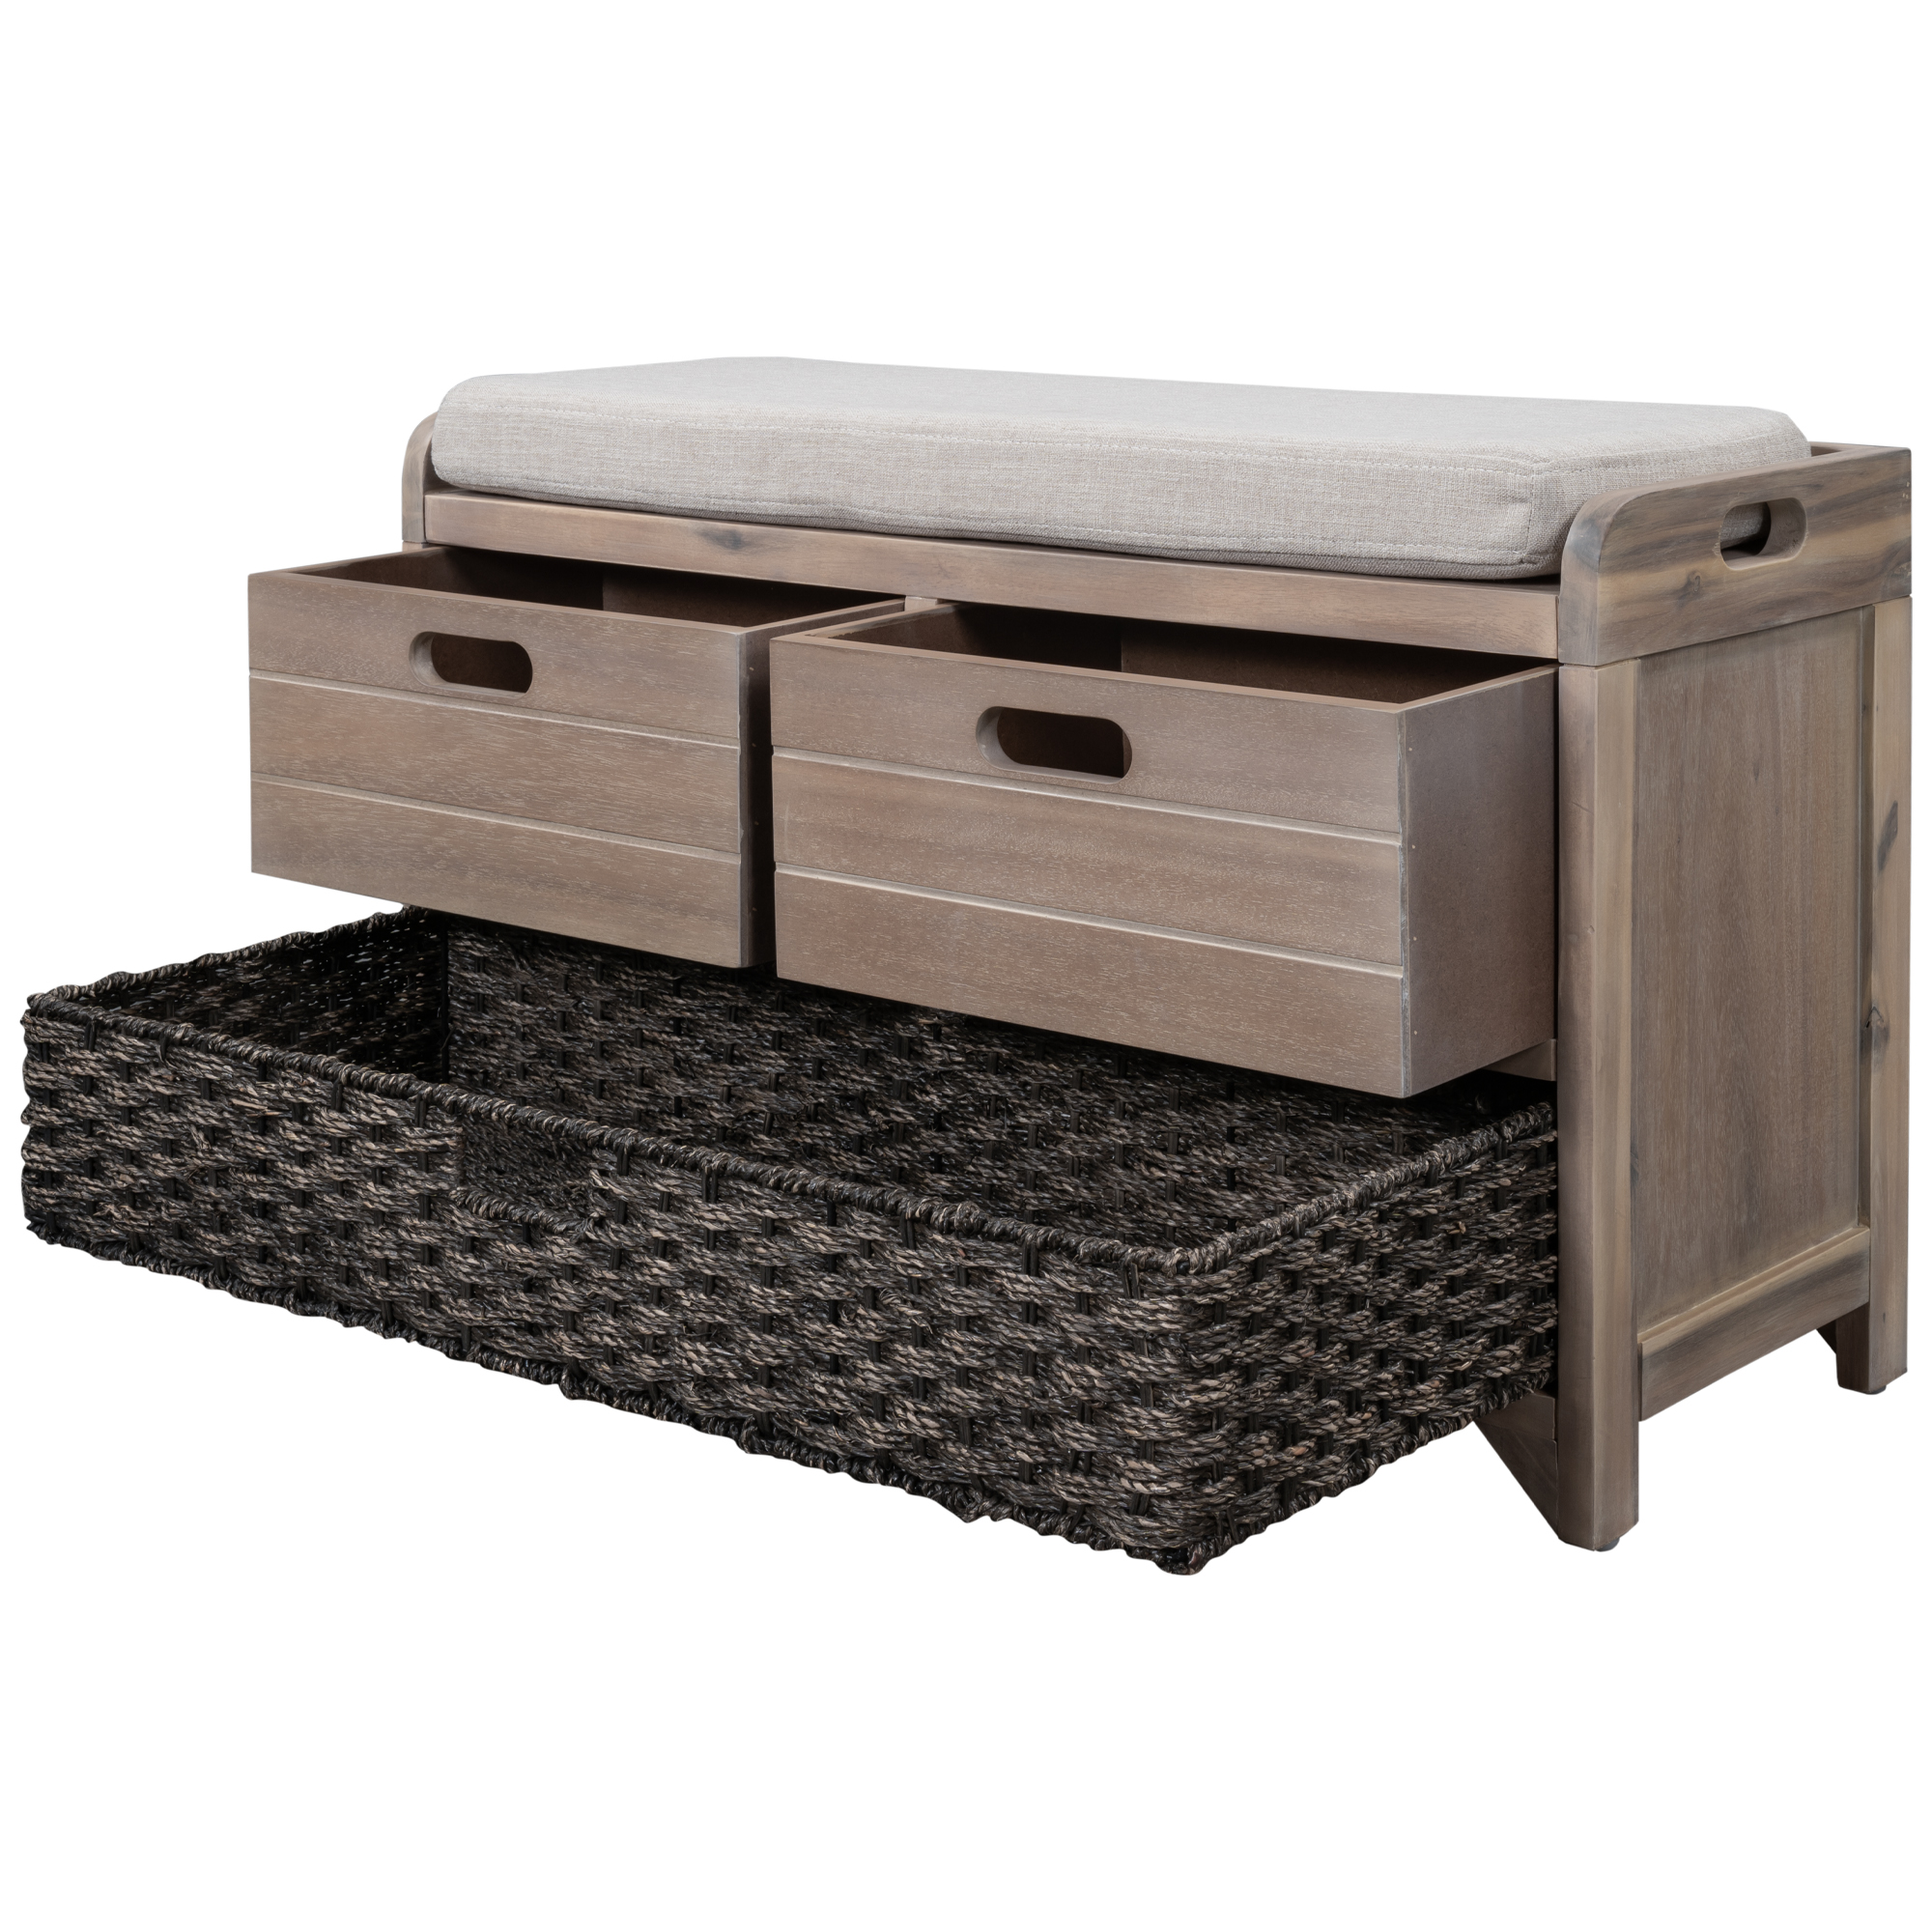 Storage Bench With Removable Basket And 2 Drawers